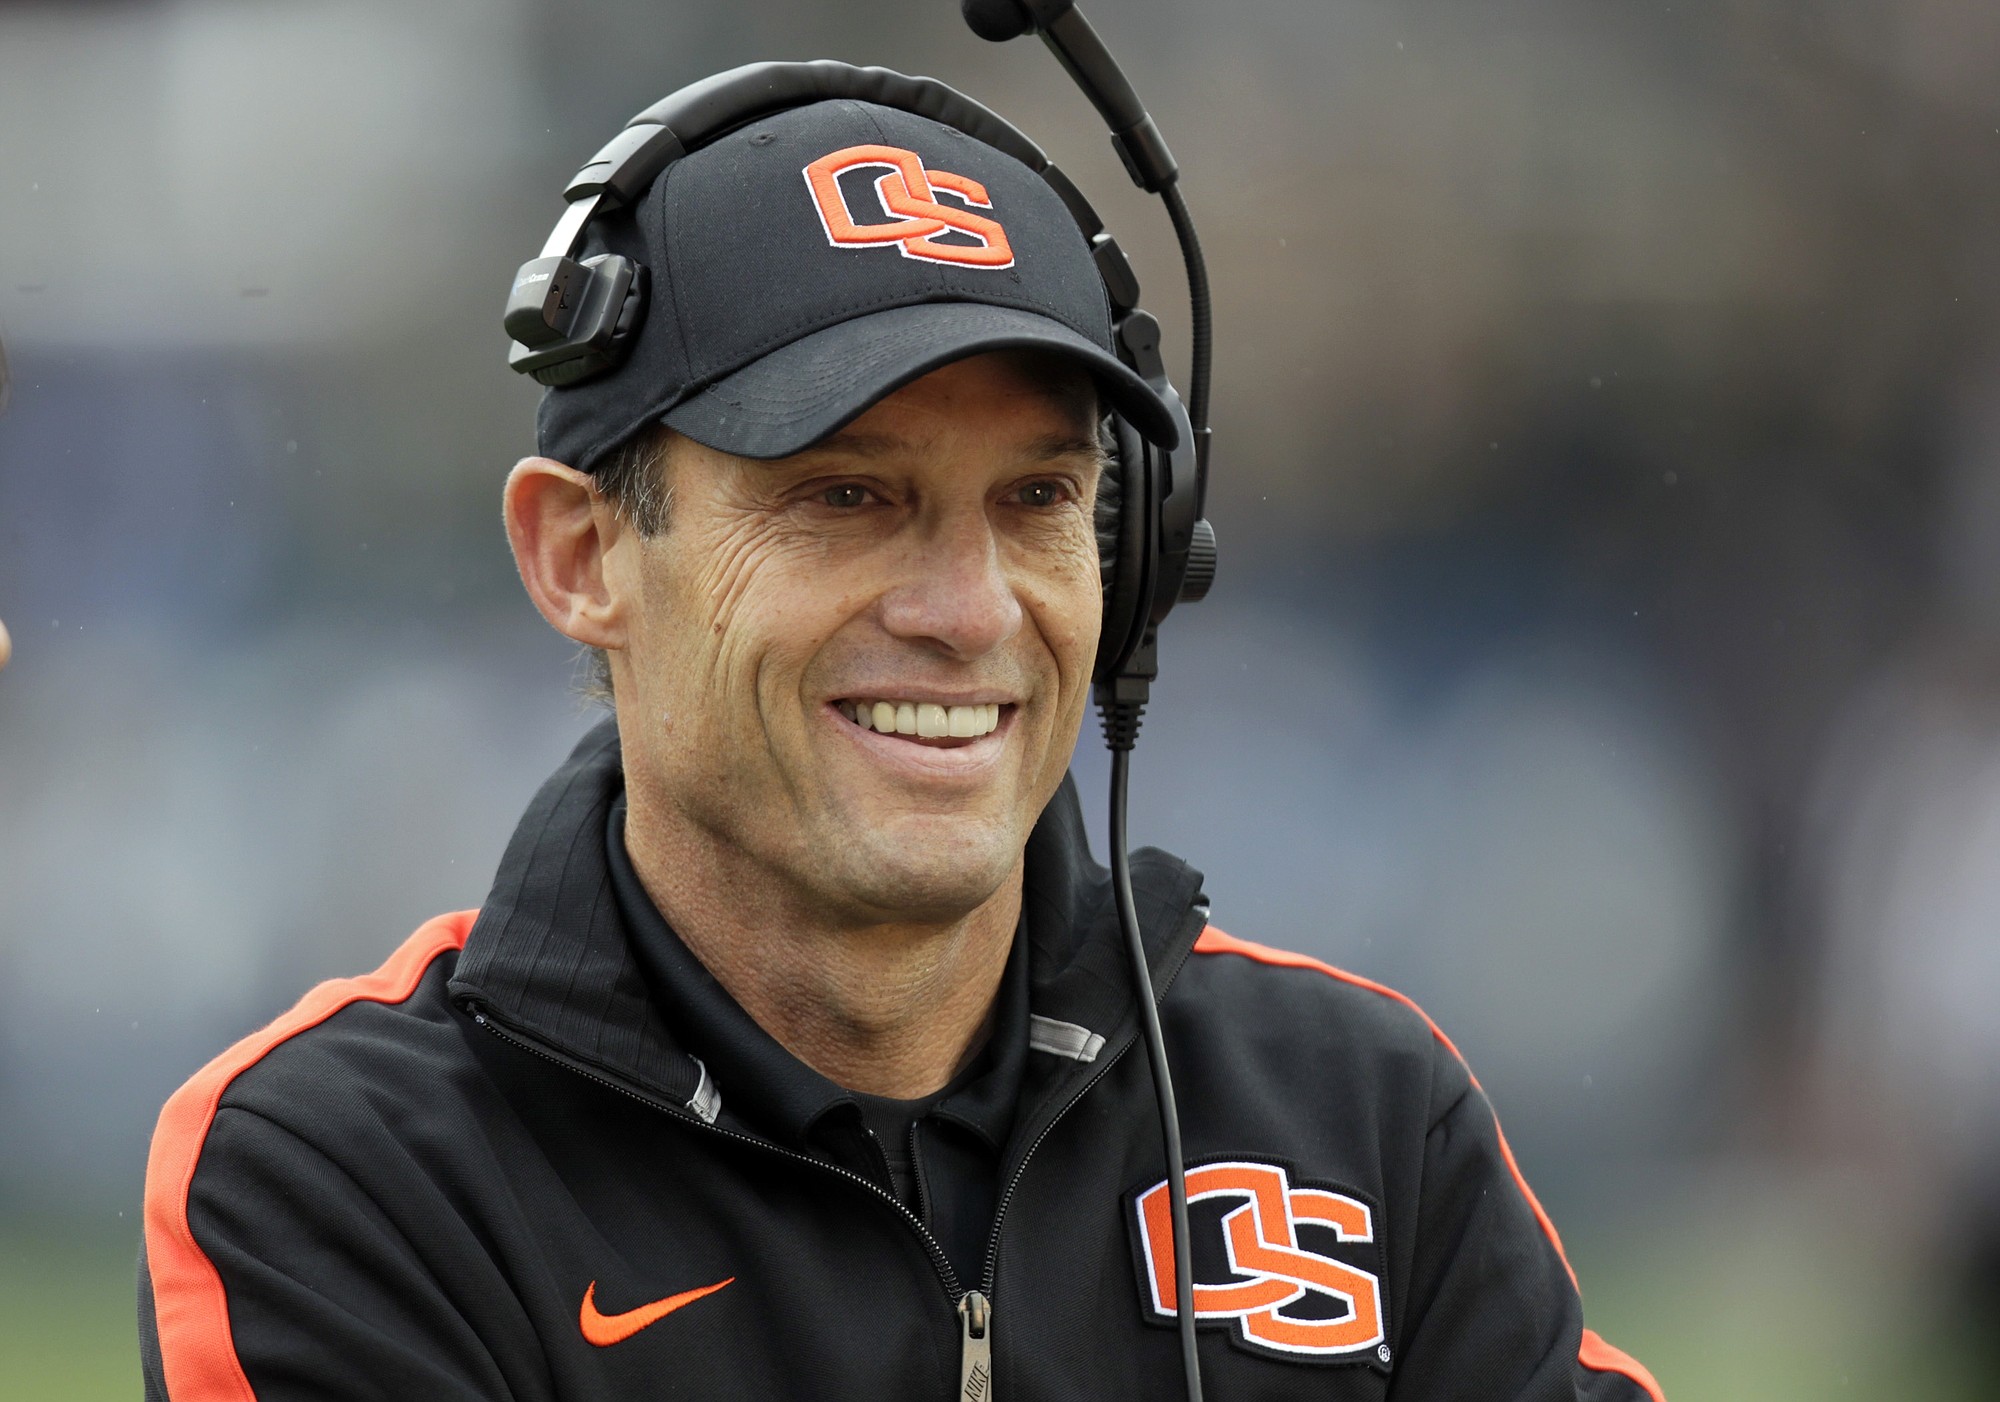 Nebraska has hired Mike Riley from Oregon State as its new football coach on Thursday, Dec. 4, 2014, replacing the fired Bo Pelini.